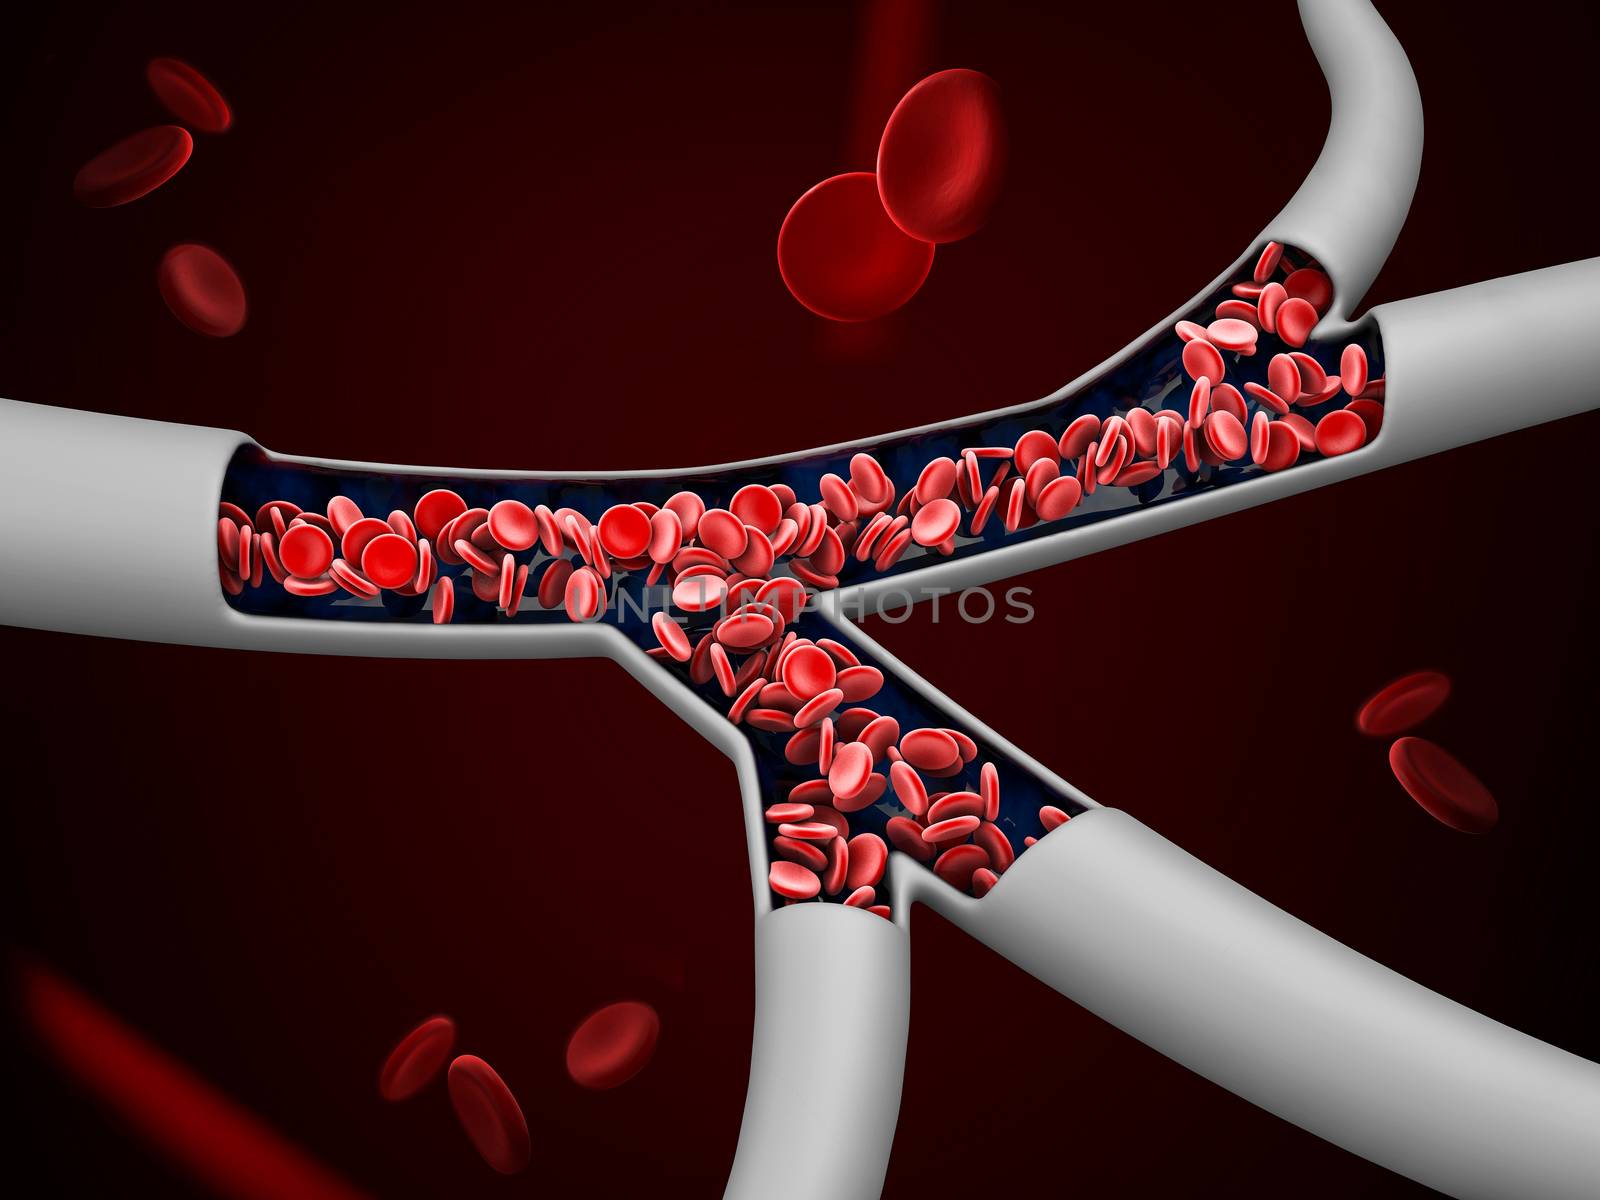 3d Illustration of red blood cells in vein, clipping path included by tussik